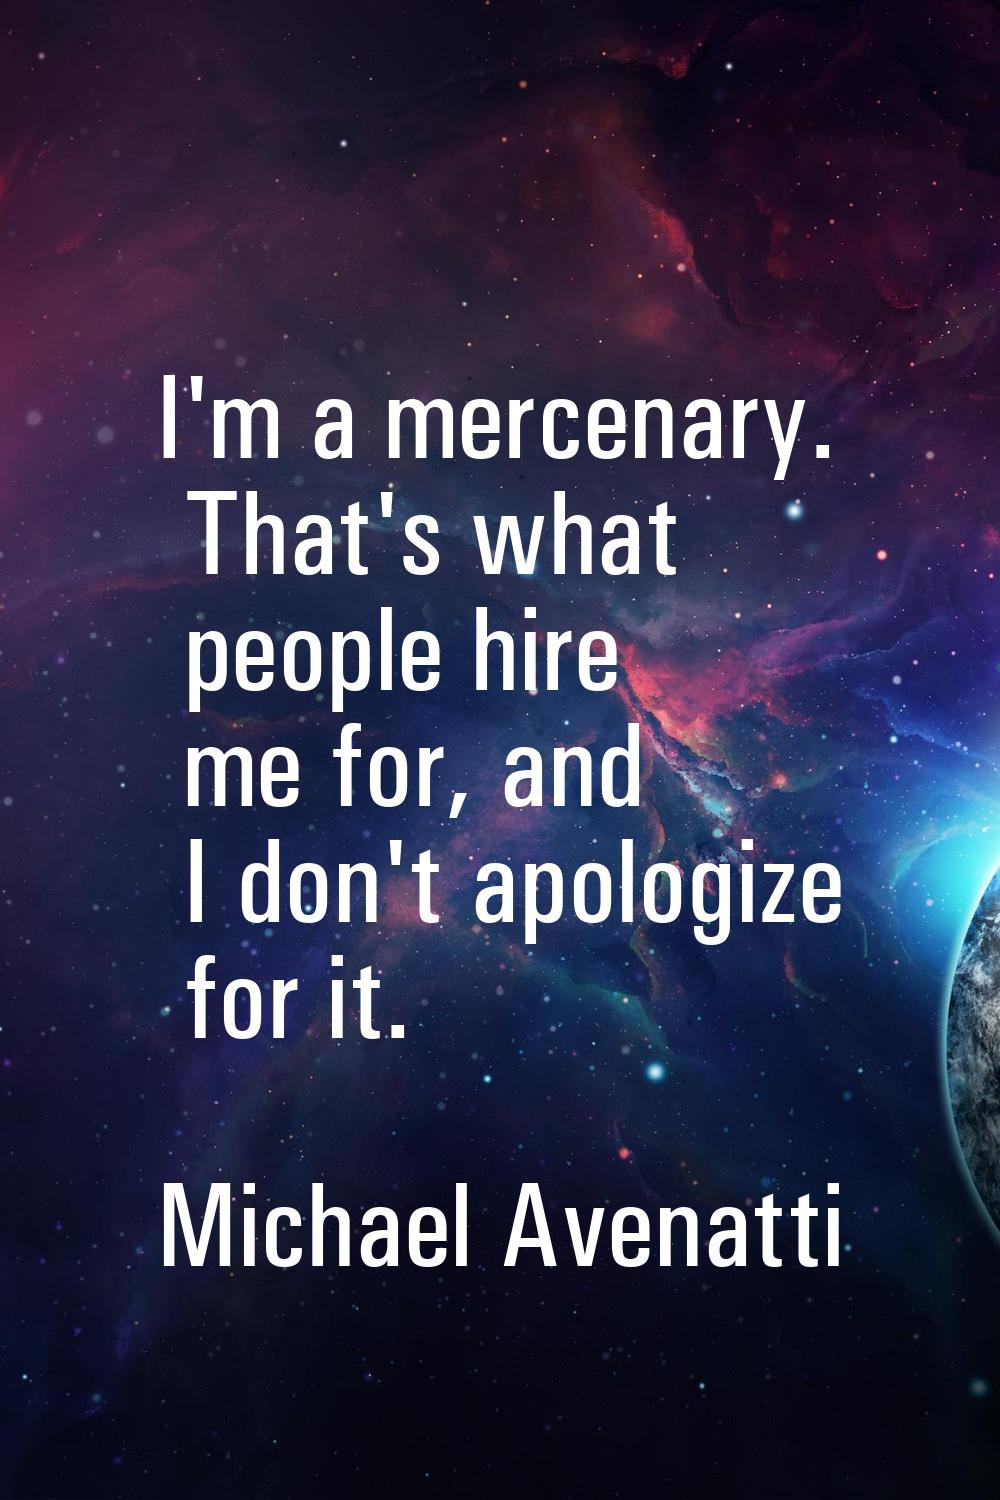 I'm a mercenary. That's what people hire me for, and I don't apologize for it.